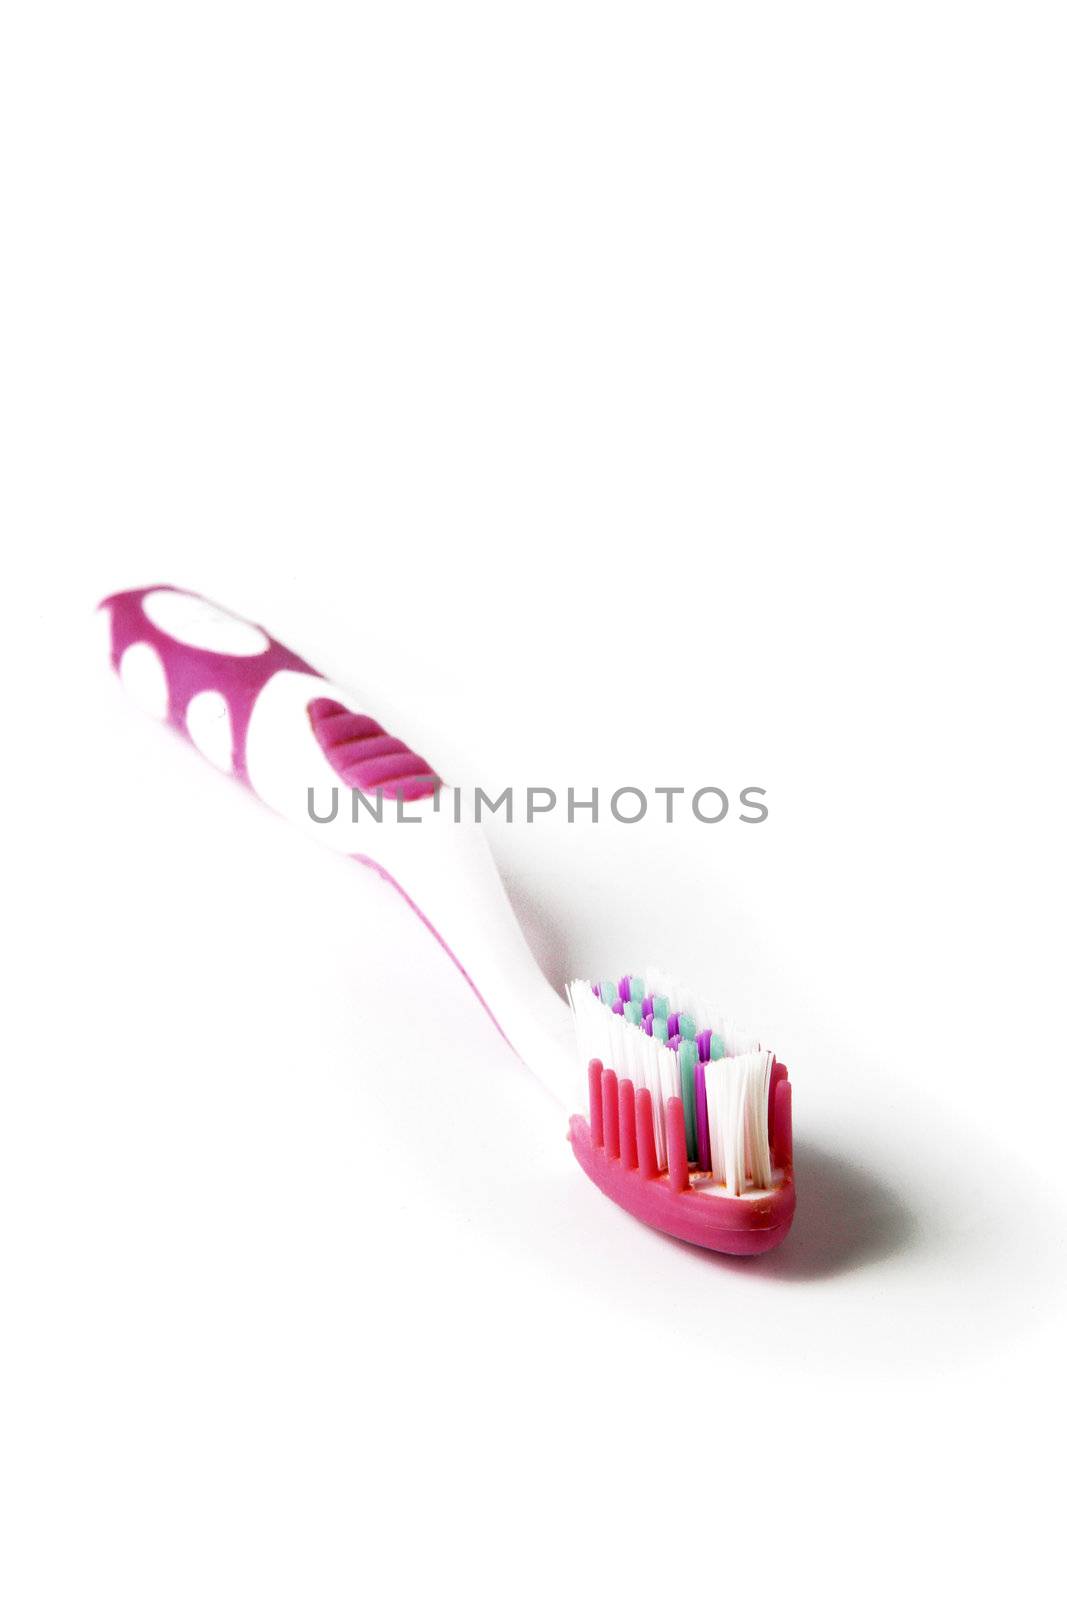 Toothbrush by phovoir